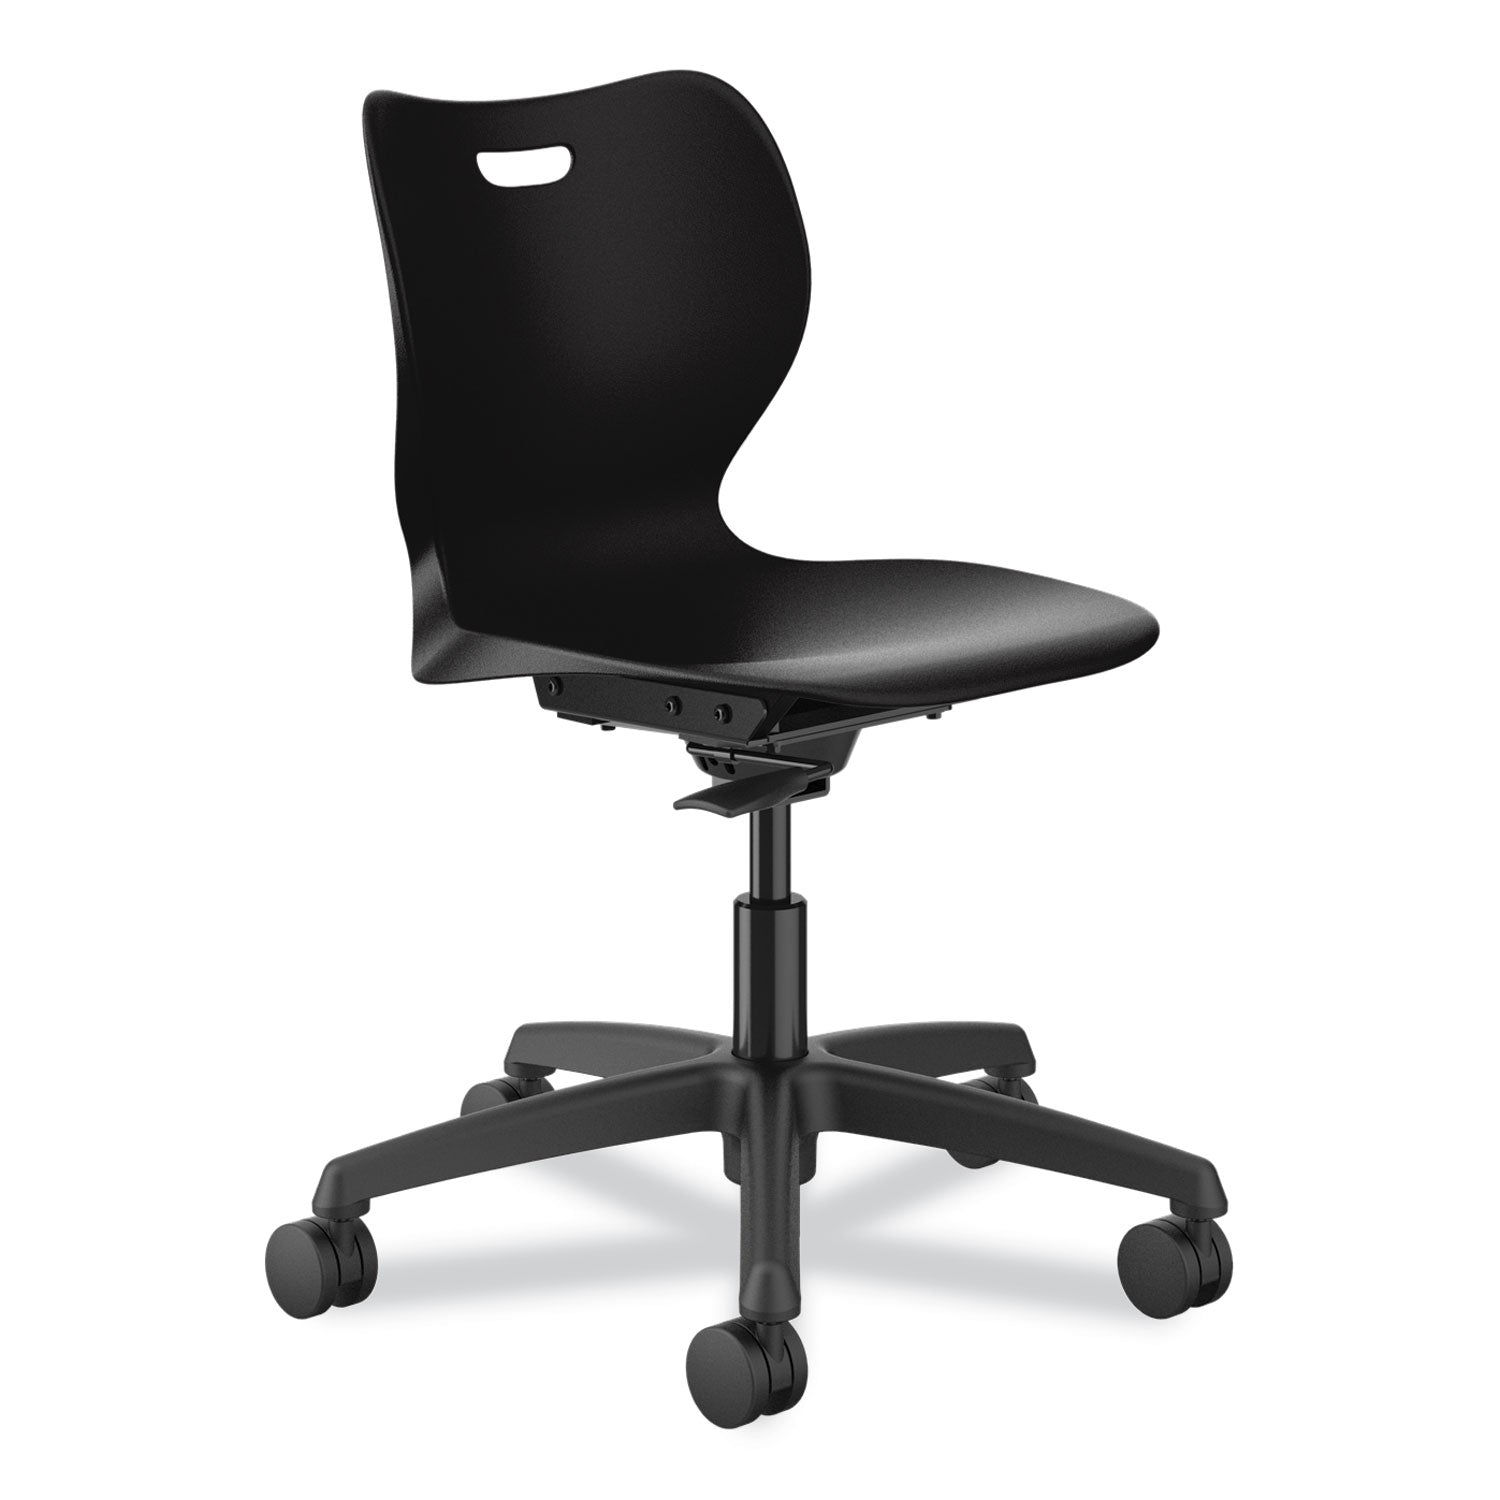 smartlink-task-chair-supports-up-to-275-lb-3475-seat-height-onyx-seat-back-black-base-ships-in-7-10-business-days_honsstk18bhlon - 1